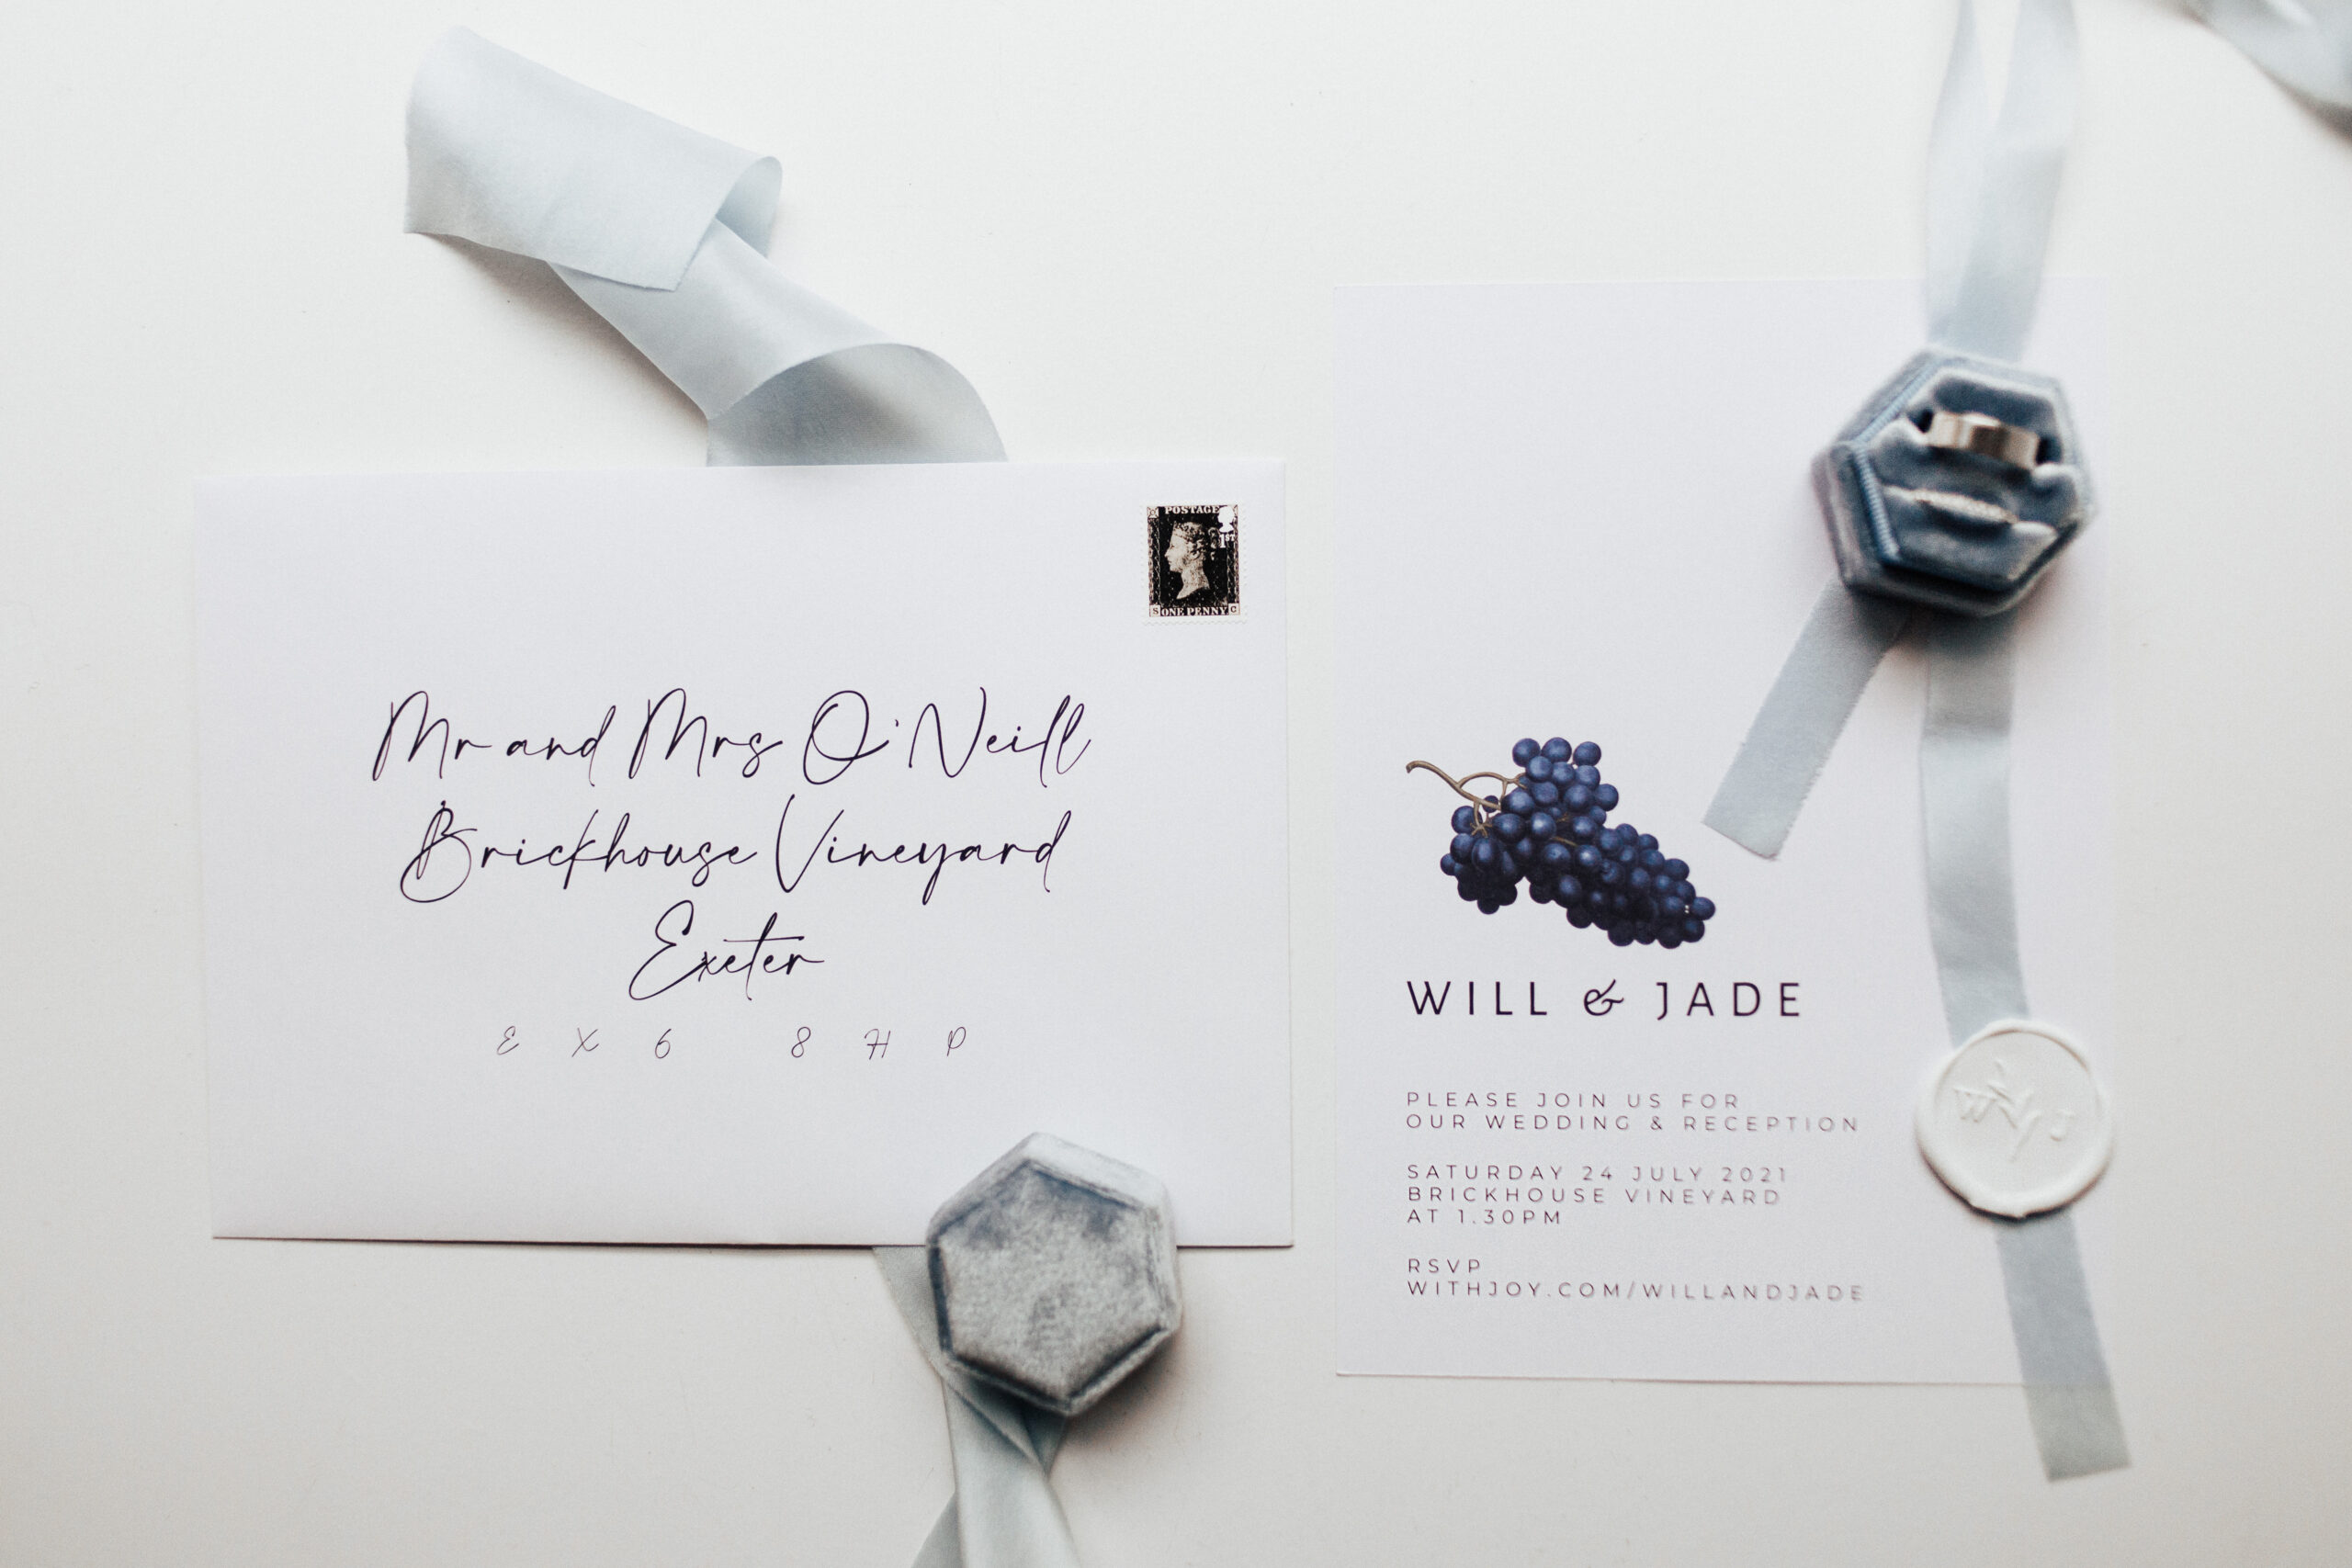 A wedding flat lay of a black and white bespoke wedding invitation and envelope. The invitation reads "Will and Jade" and has blue grapes. The envelope has modern calligraphy and a black stamp. The flat lay also includes blue and white details such as a blue ring box with silver wedding rings, blue ribbon, and a white personalised initials wax seal.